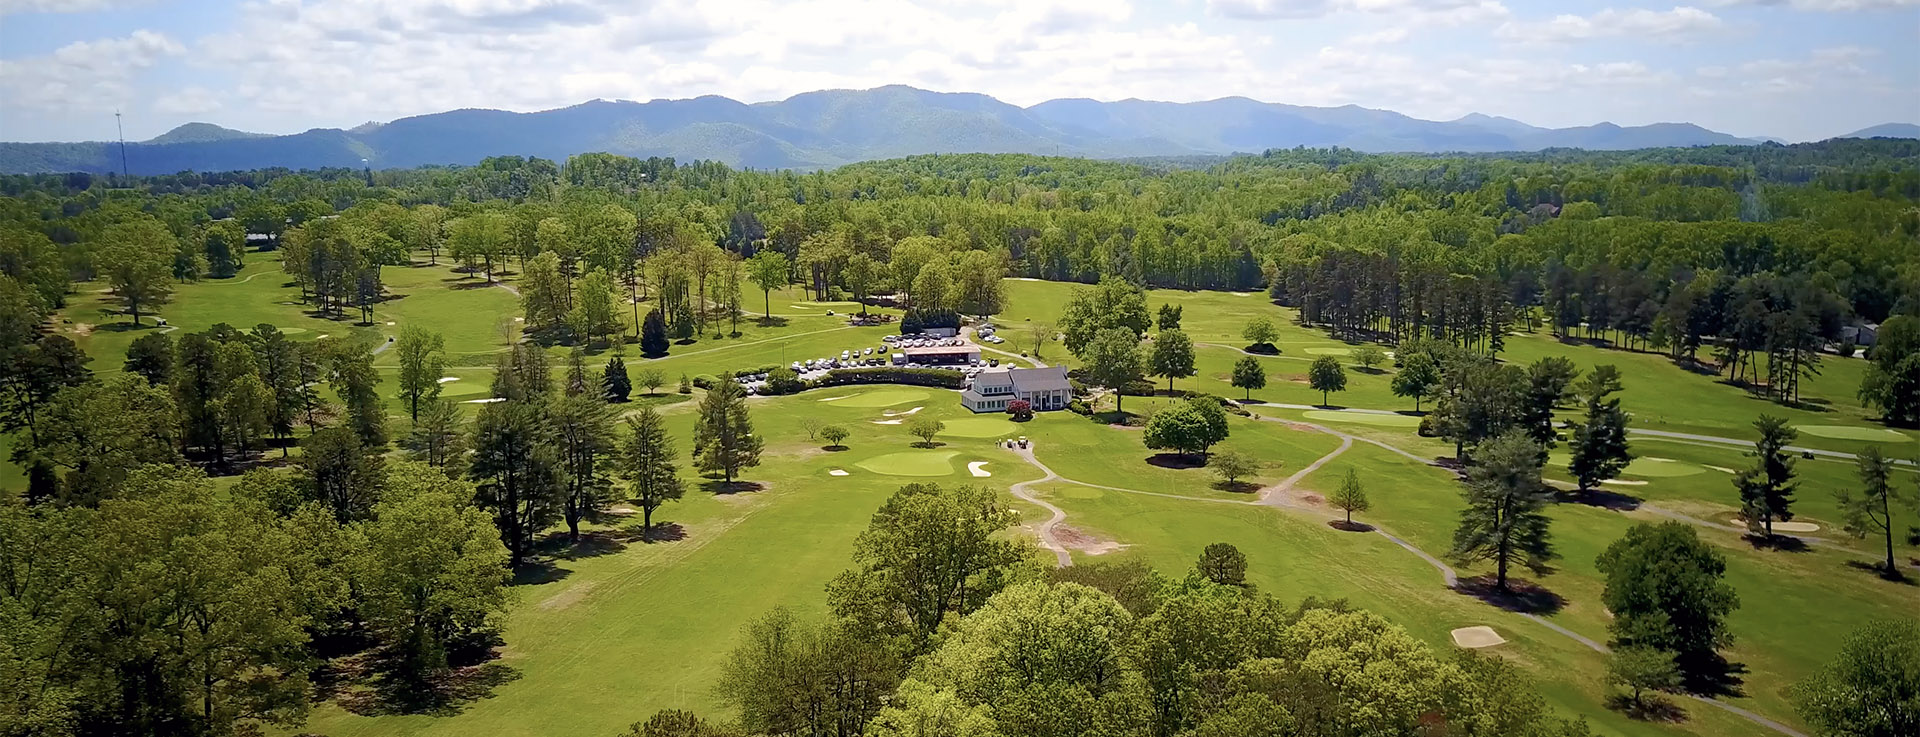 Valley Graphics and Video Production Photo of Mimosa Hills Country Club, Morganton, NC - shot by Tony Lee Glenn